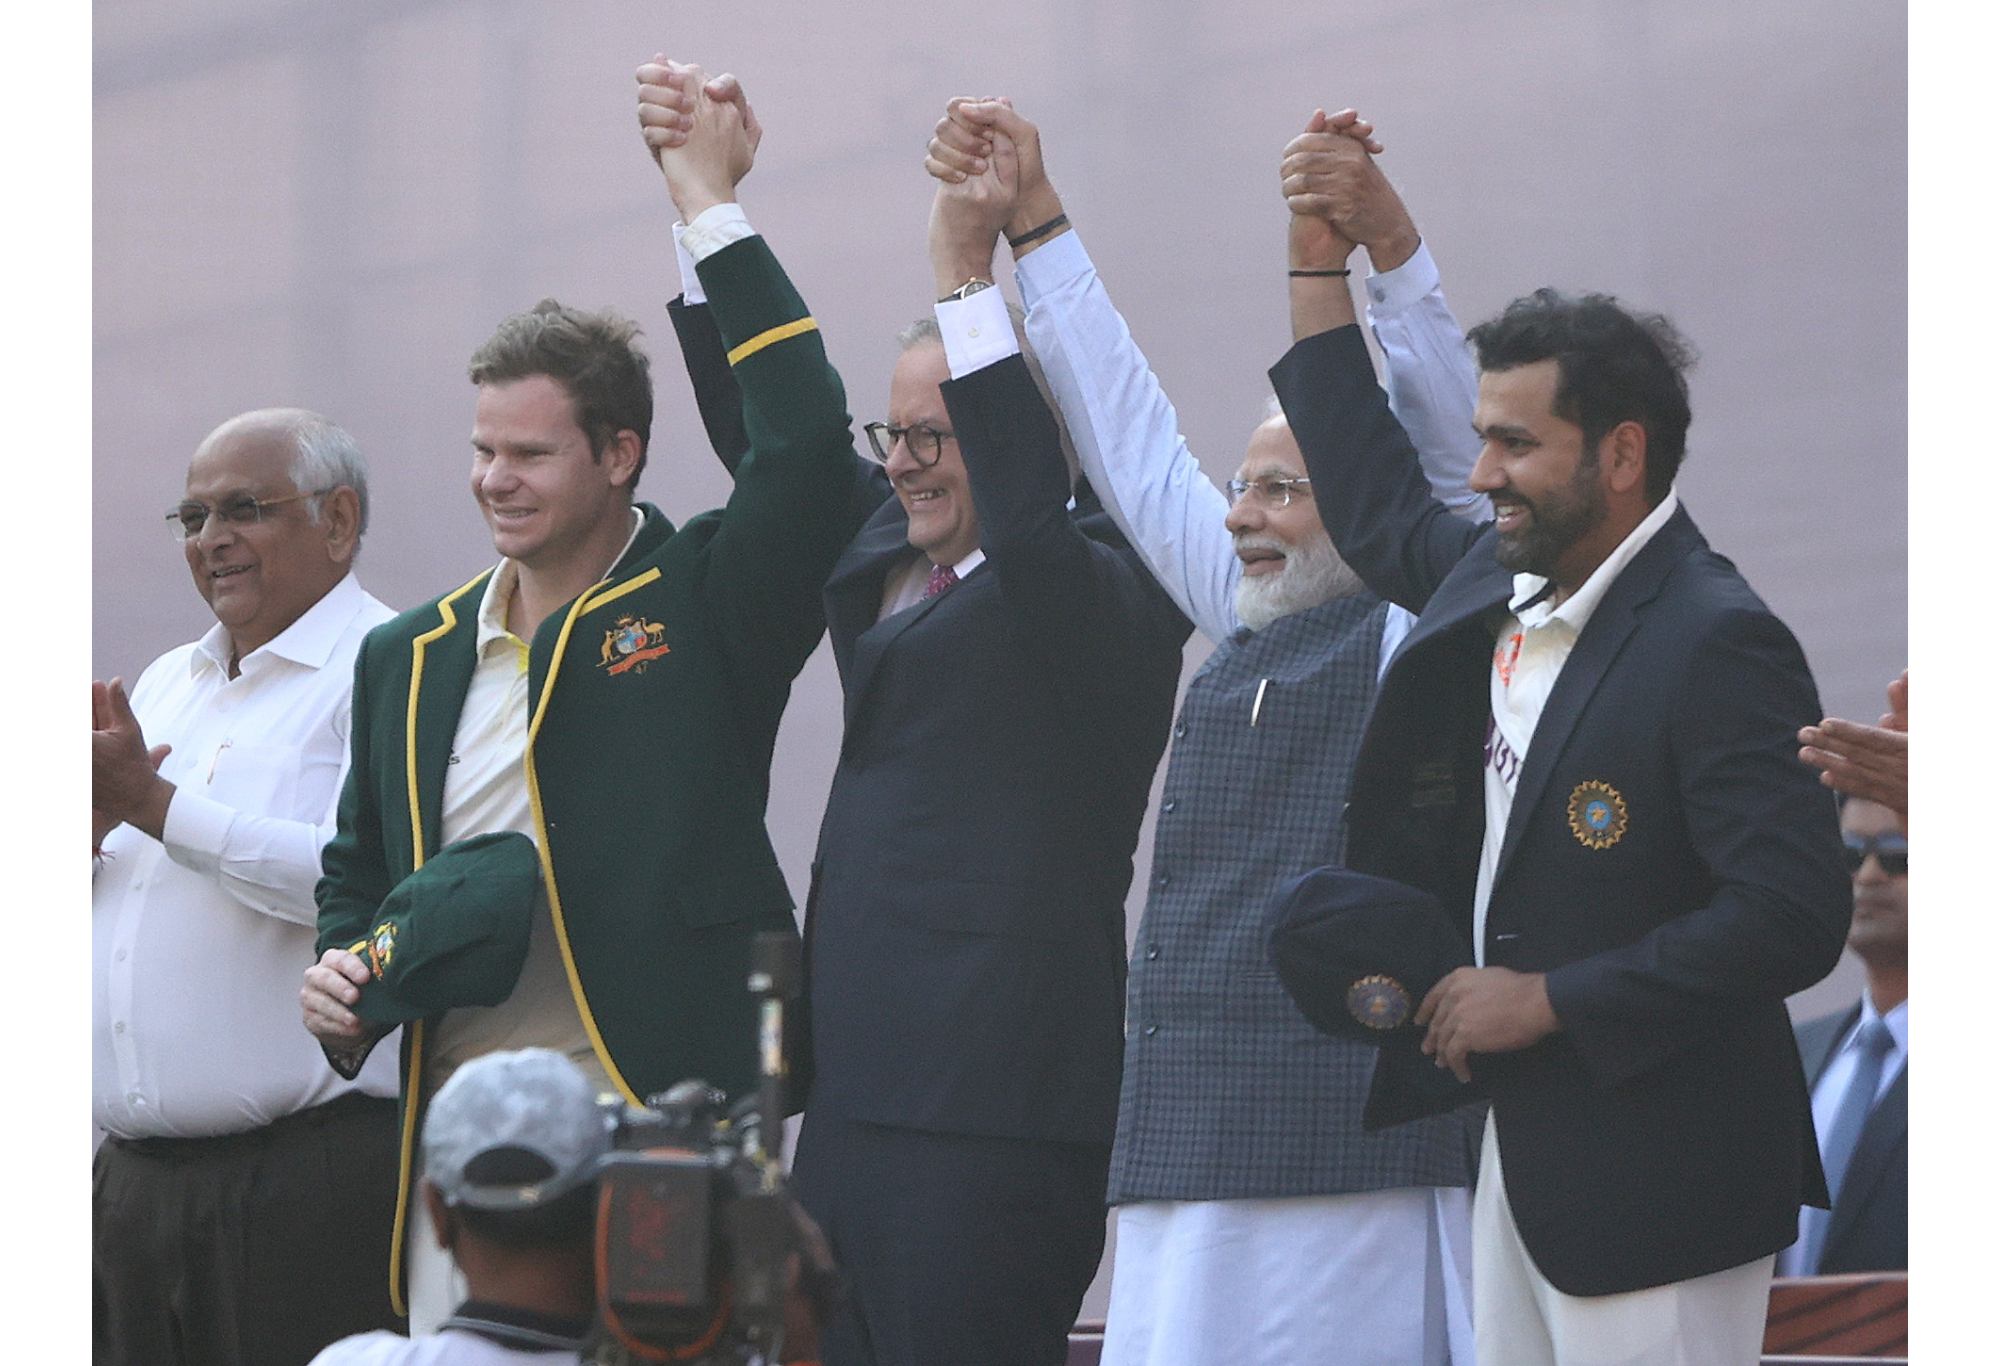 AHMEDABAD, INDIA - MARCH 09: Australian Prime Minister Anthony Albanese and Indian Prime Minister Narendra Modi pose with Australian captain Steve Smith and Indian captain Rohit Sharma during day one of the Fourth Test match in the series between India and Australia at Sardar Patel Stadium on March 09, 2023 in Ahmedabad, India. (Photo by Robert Cianflone/Getty Images)